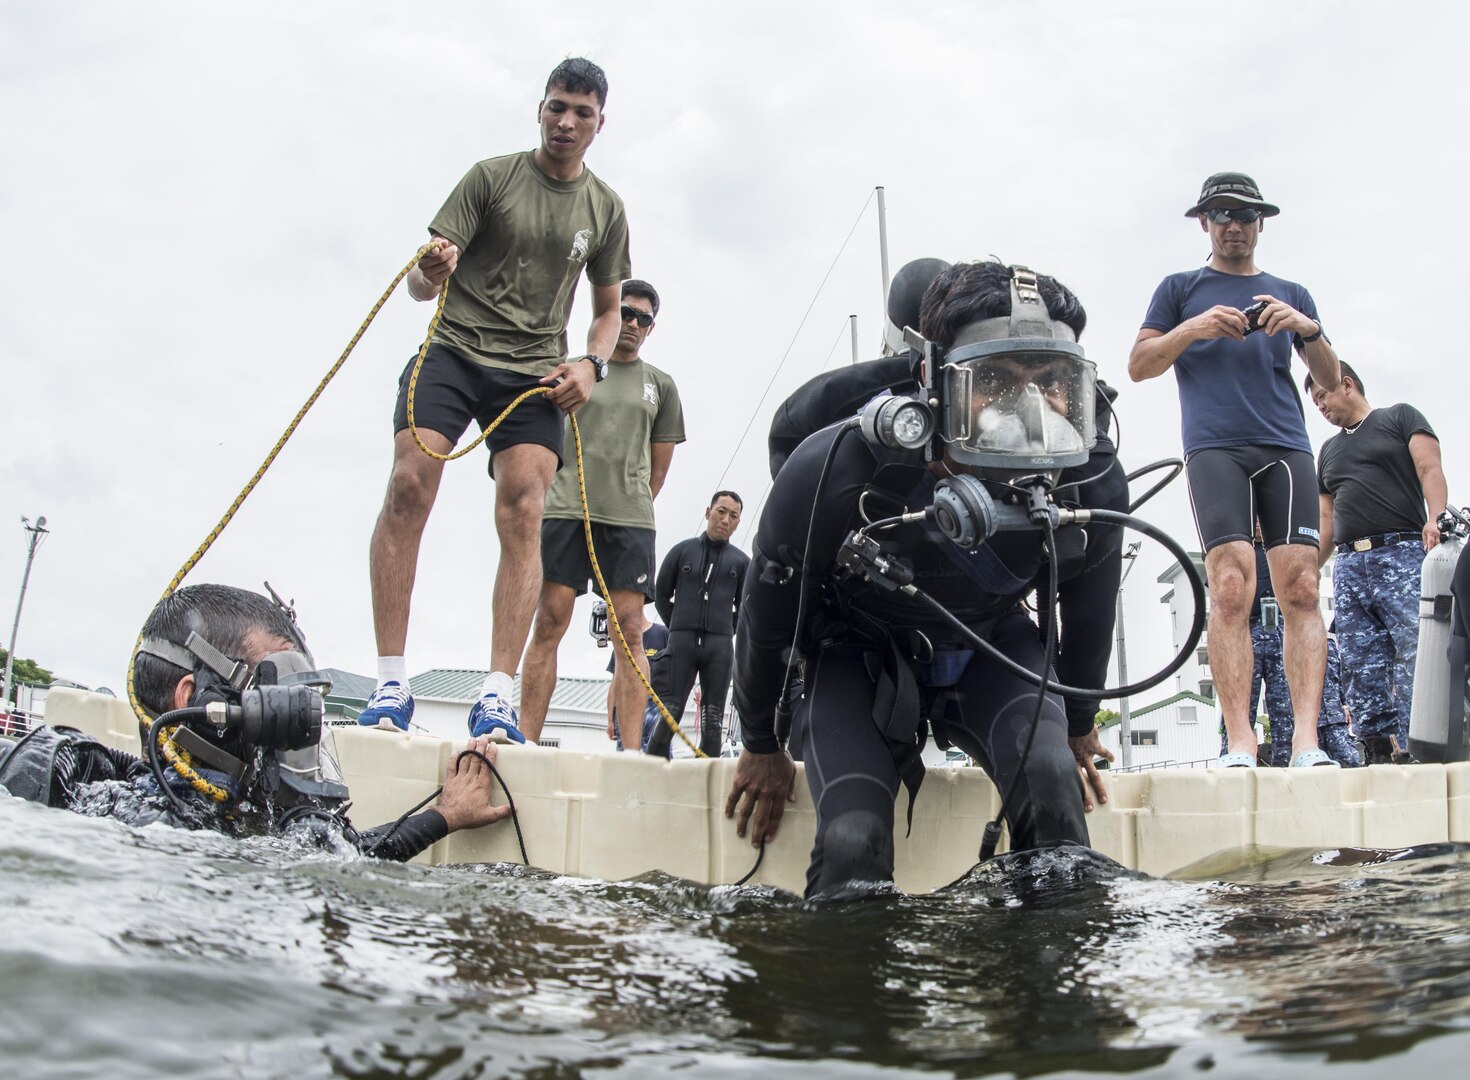 An Indian Explosive Ordnance Disposal (EOD) technician enters the water during a training dive as part of exercise Malabar 2016. A trilateral maritime exercise, Malabar is designed to enhance dynamic cooperation between the Indian Navy, Japan Maritime Self-Defense Force (JMSDF) and U.S. Navy forces in the Indo-Asia-Pacific. (U.S. Navy combat camera photo by Mass Communication Specialist 1st Class Charles E. White/Released)